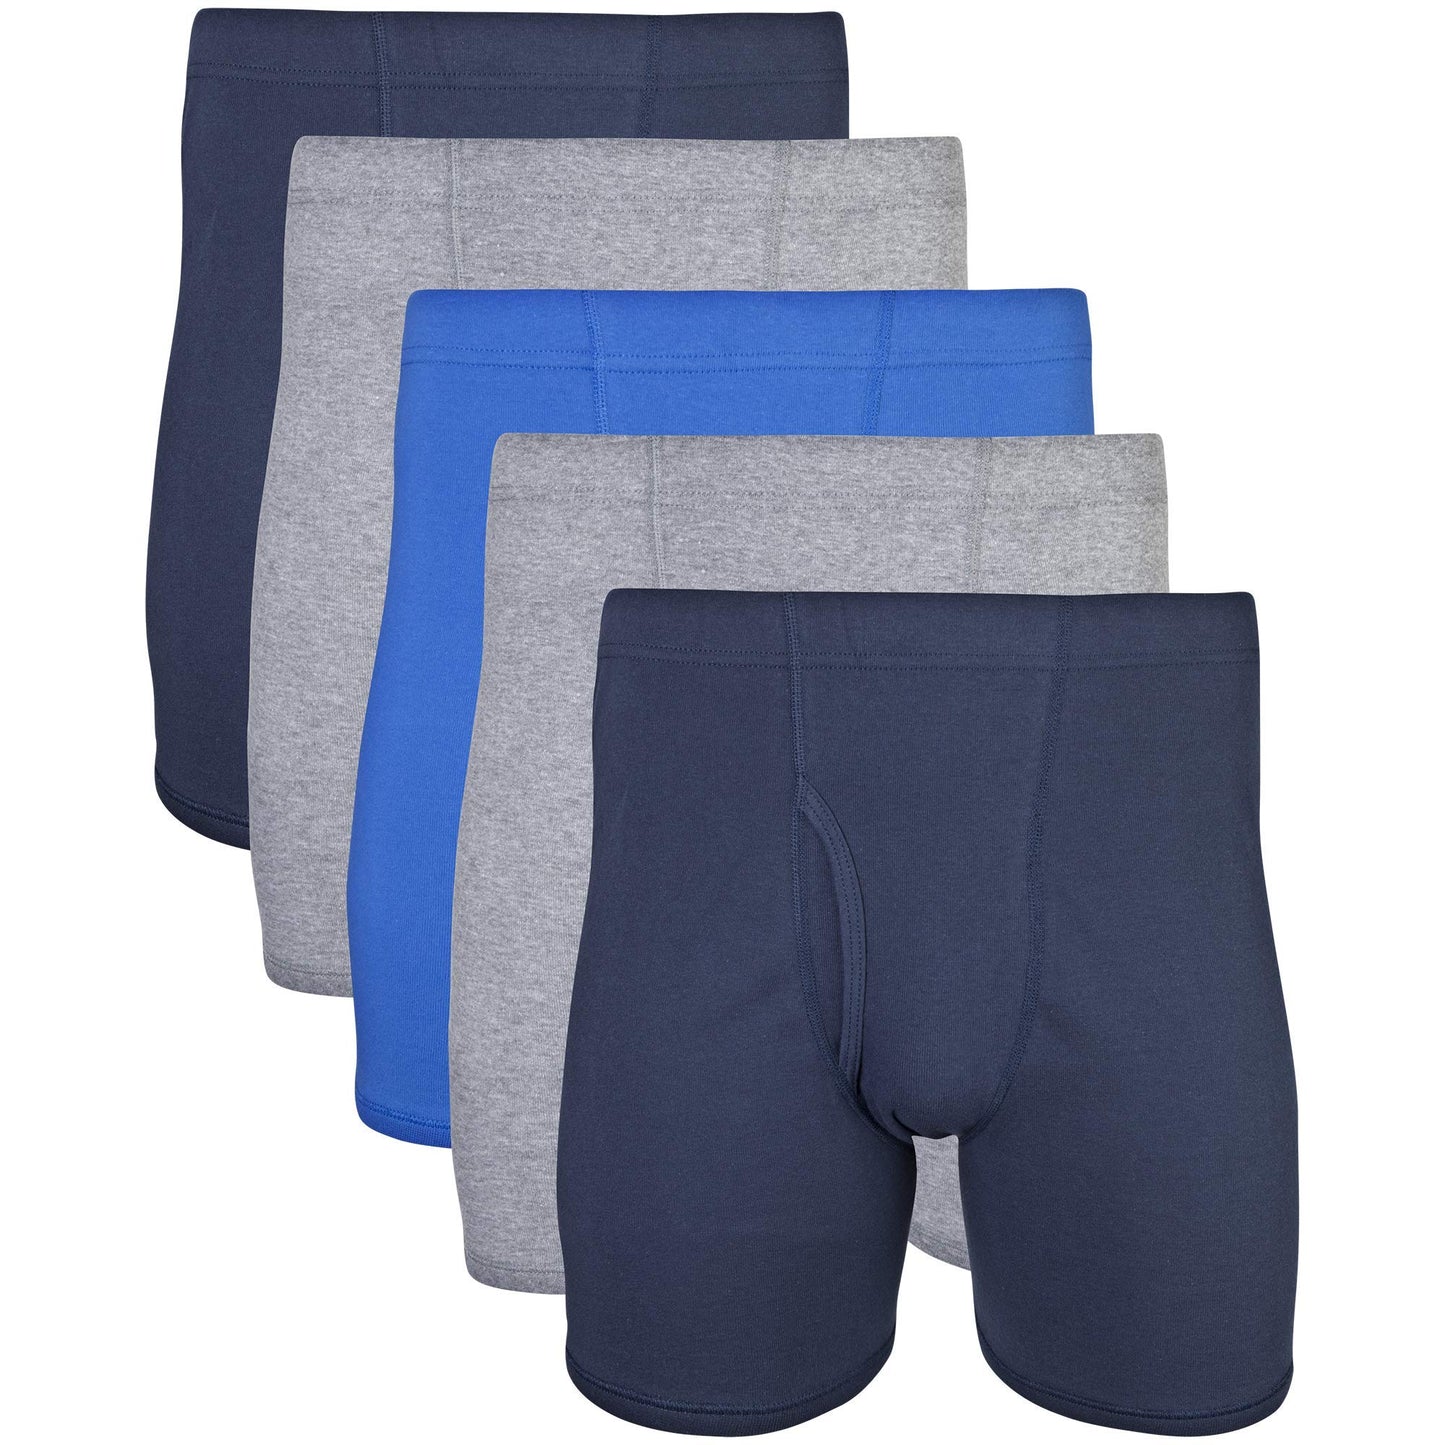 Gildan Men's Underwear Covered Waistband Boxer Briefs, Multipack, Mixed Royal (5-Pack), Large